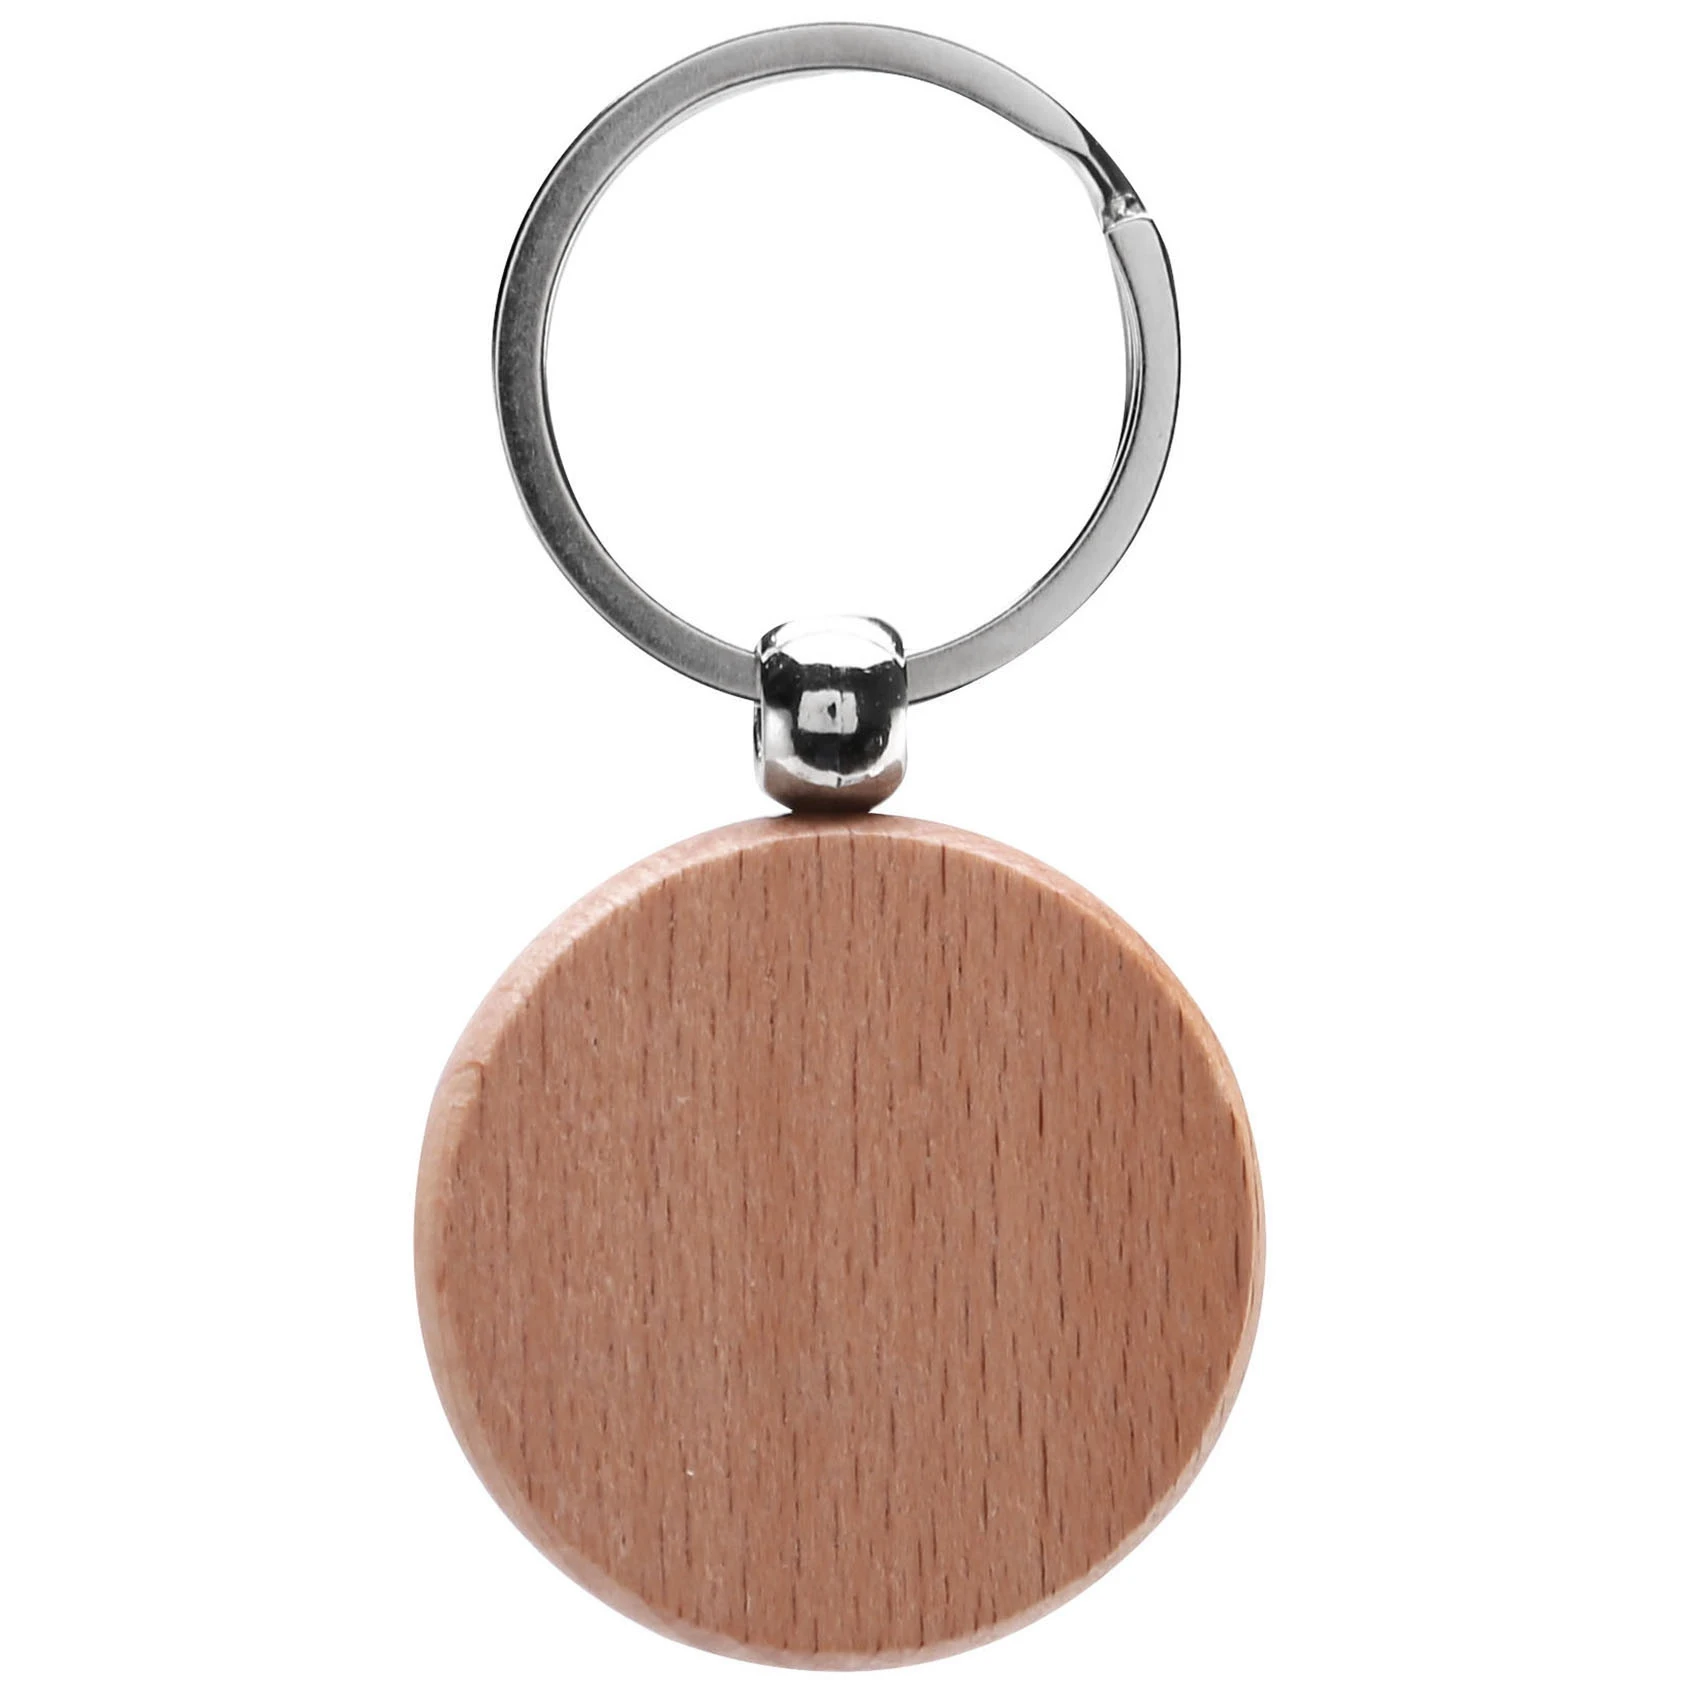 

10Pcs Blank Round Wooden Key Chain Diy Wood Keychains Key Tags Can Engrave Diy Gifts 40X40mm